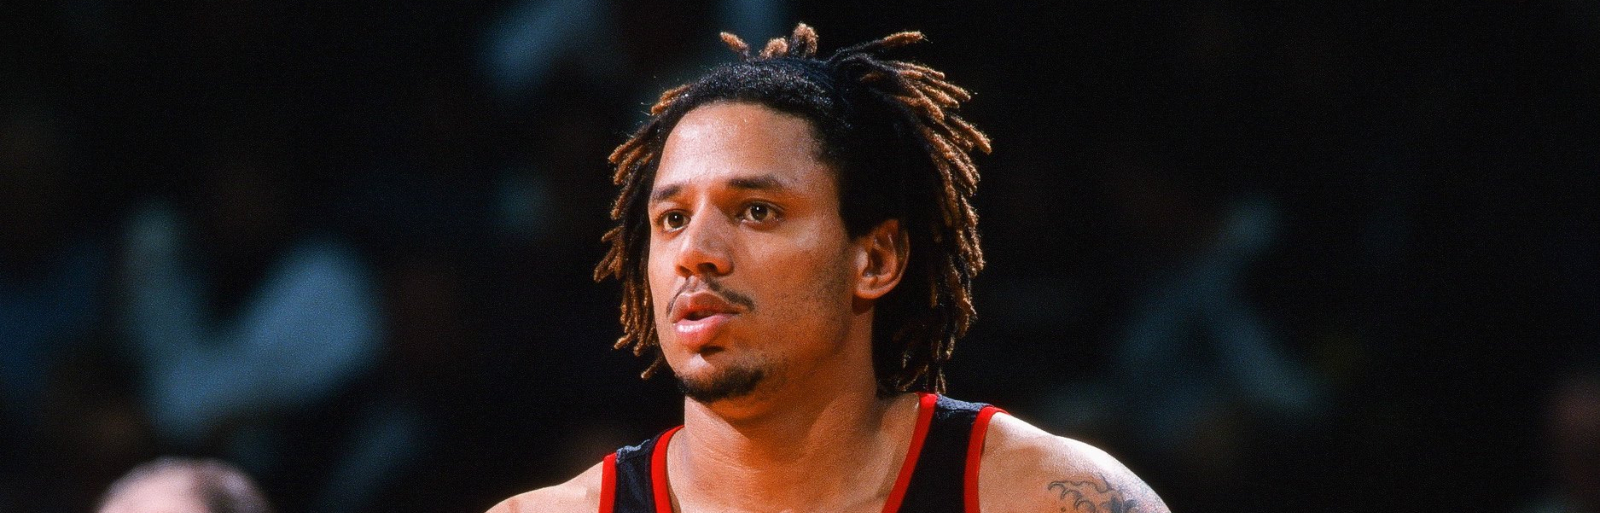 Former Trail Blazer Brian Grant details life and struggle with